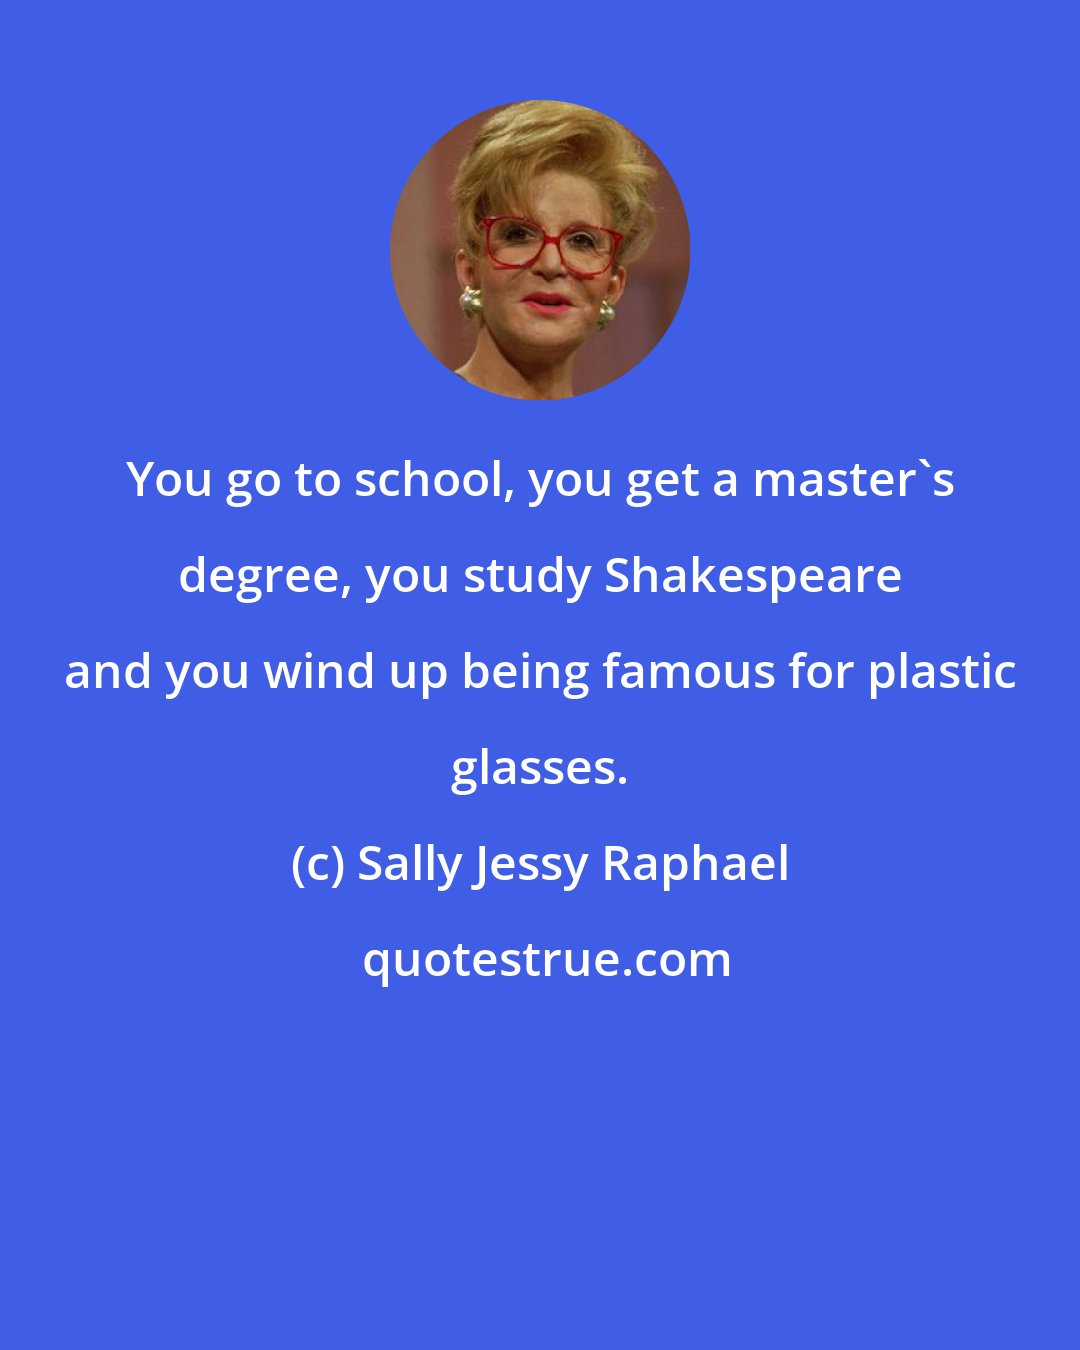 Sally Jessy Raphael: You go to school, you get a master's degree, you study Shakespeare and you wind up being famous for plastic glasses.